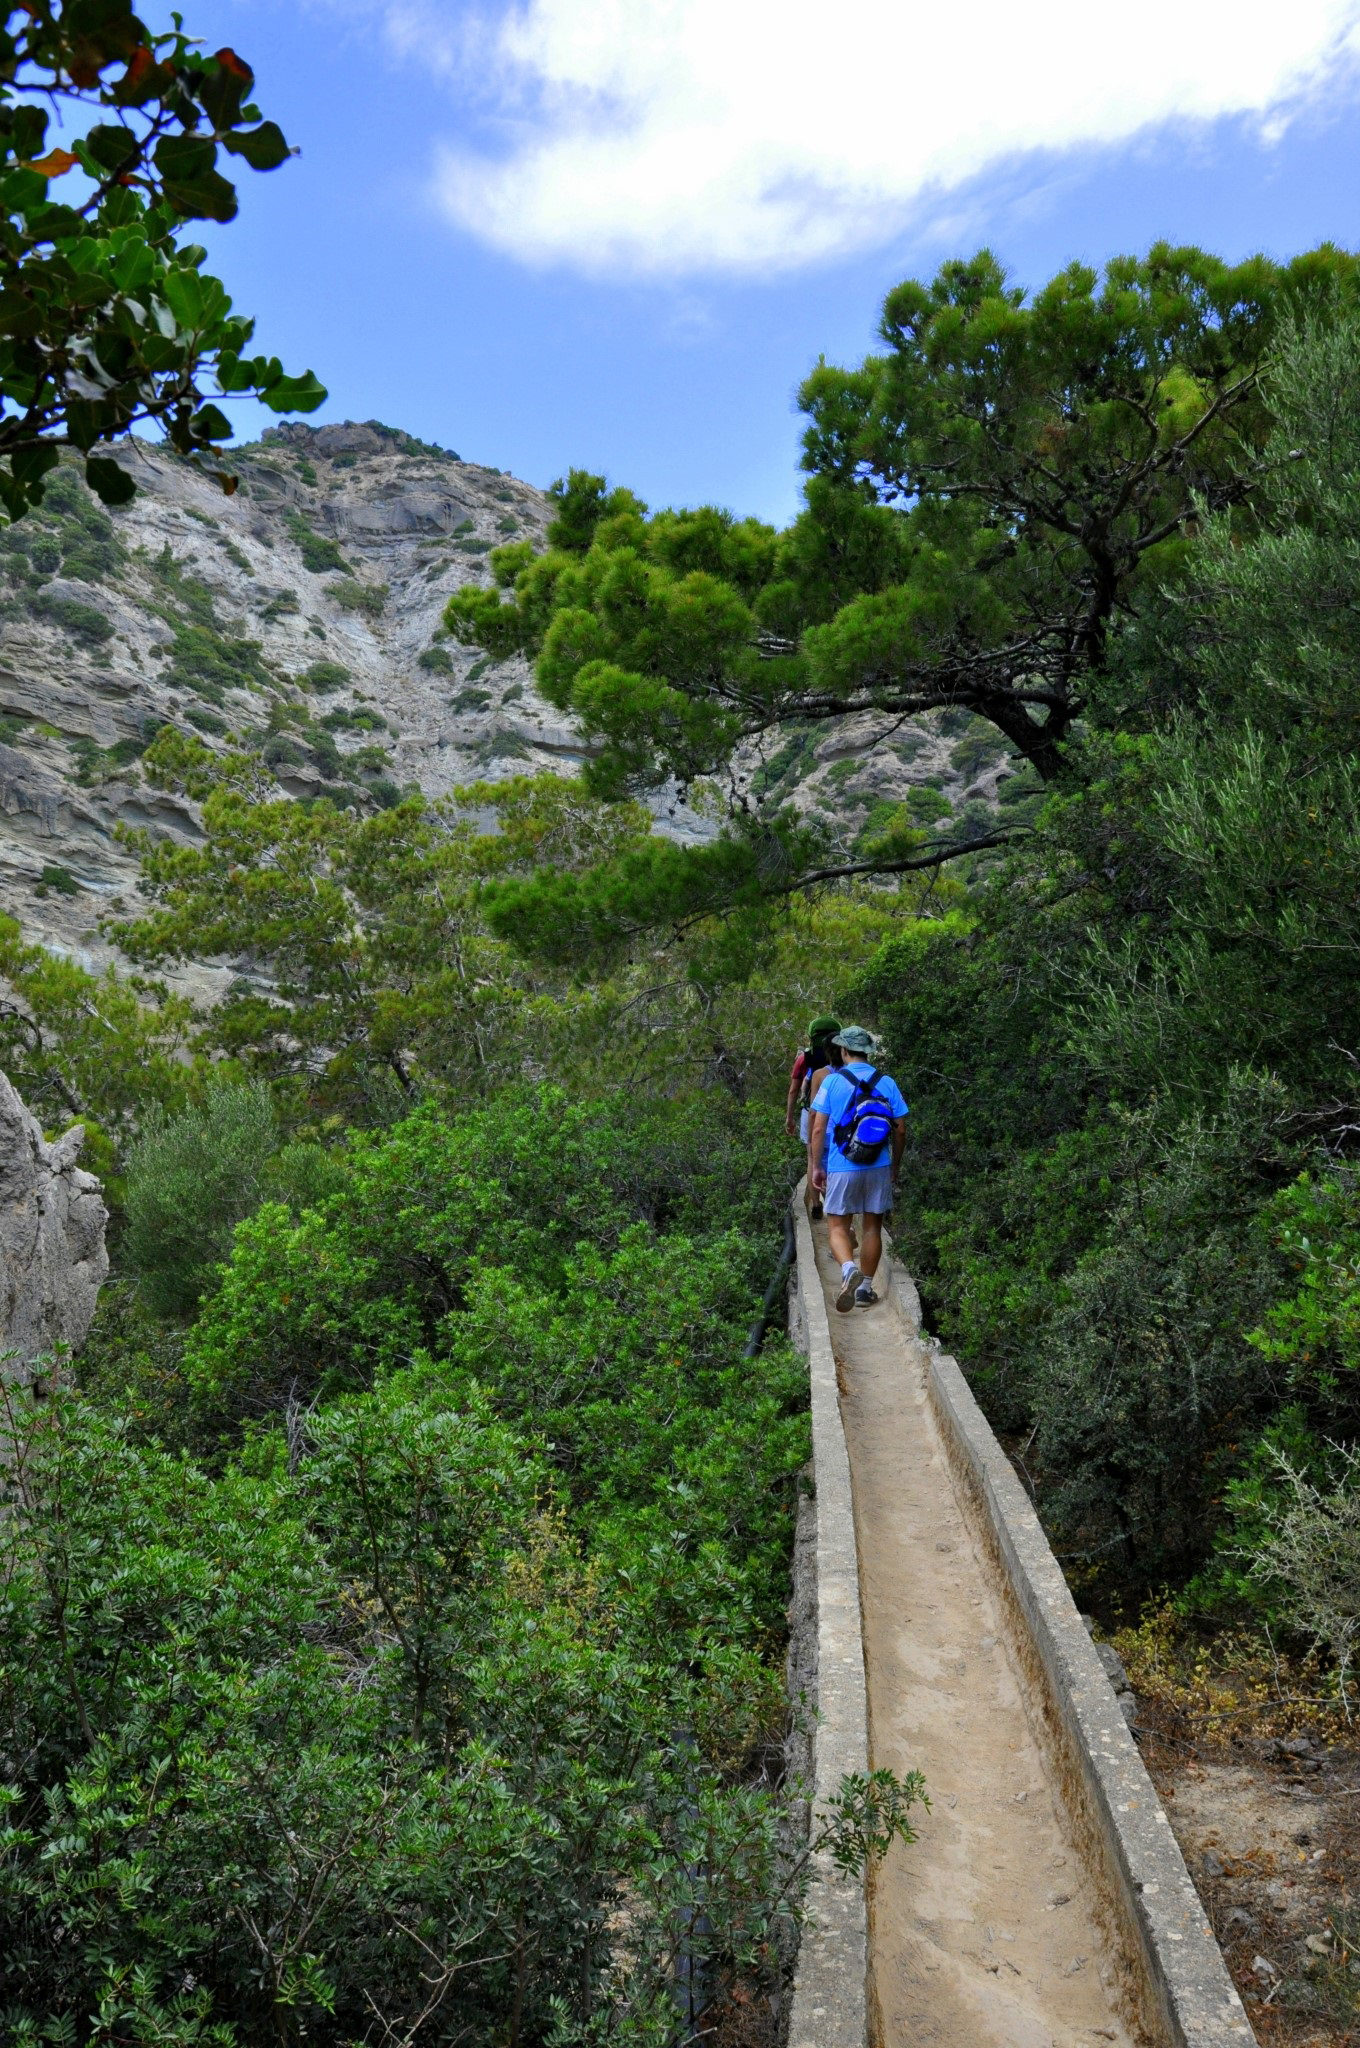 Hiking in Crete Island is a great way to get a taste of the stark beauty of nature there. Two hiking trails, an easy one and a more challenging one, are offered at Milonas Gorge.